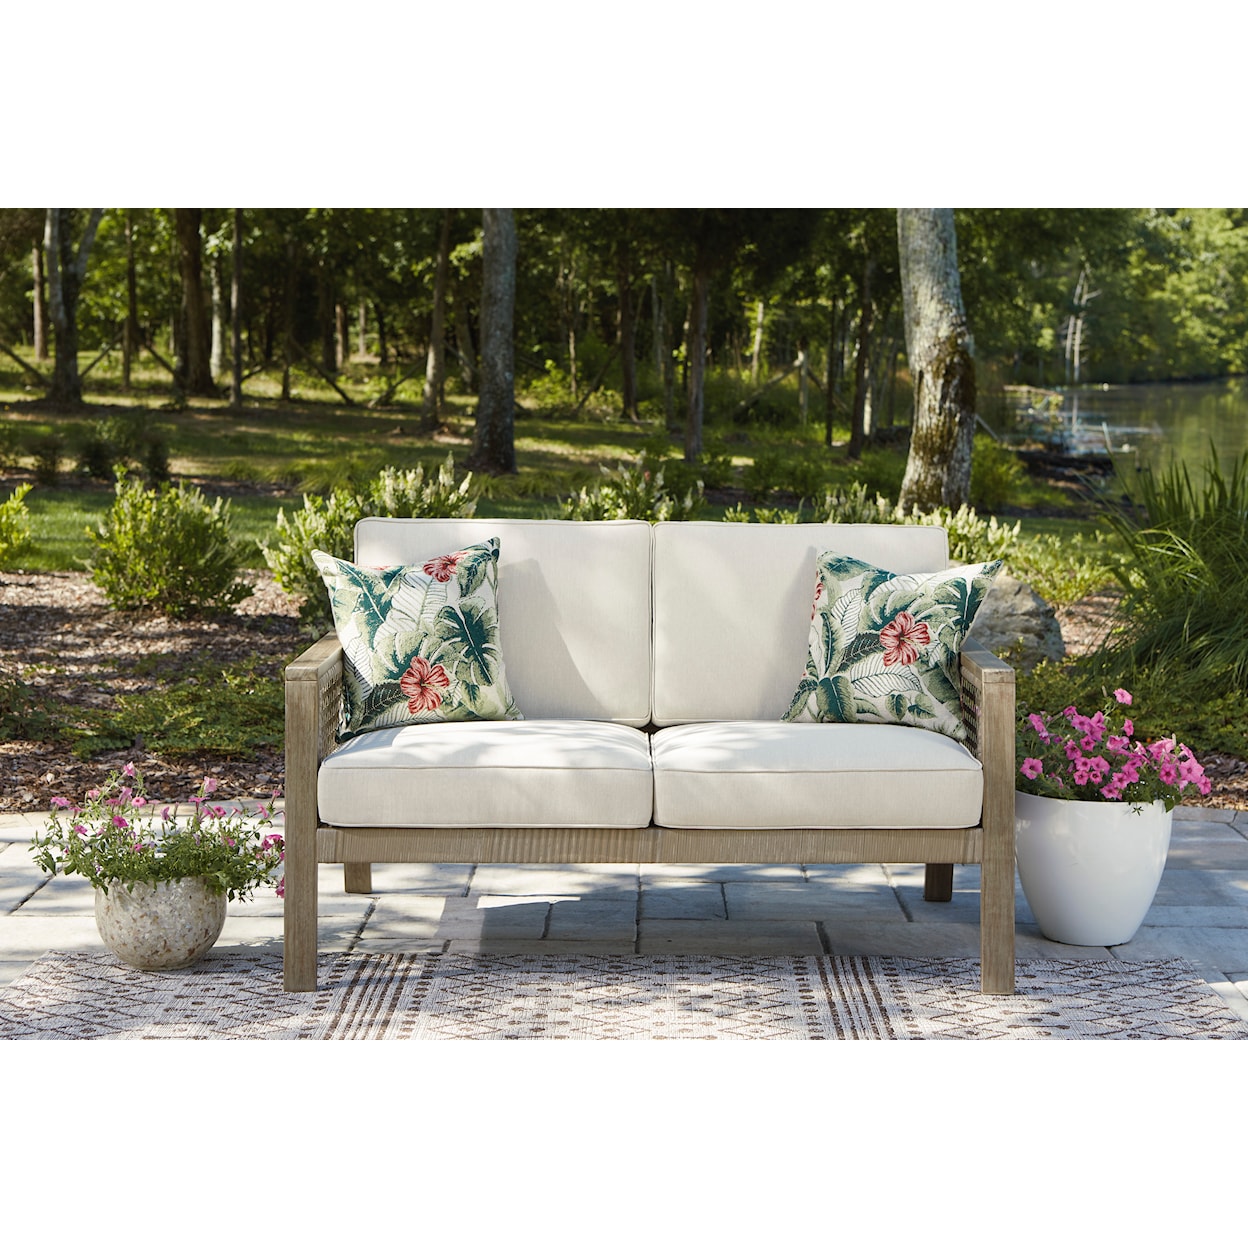 Signature Design by Ashley Barn Cove Loveseat with Cushion